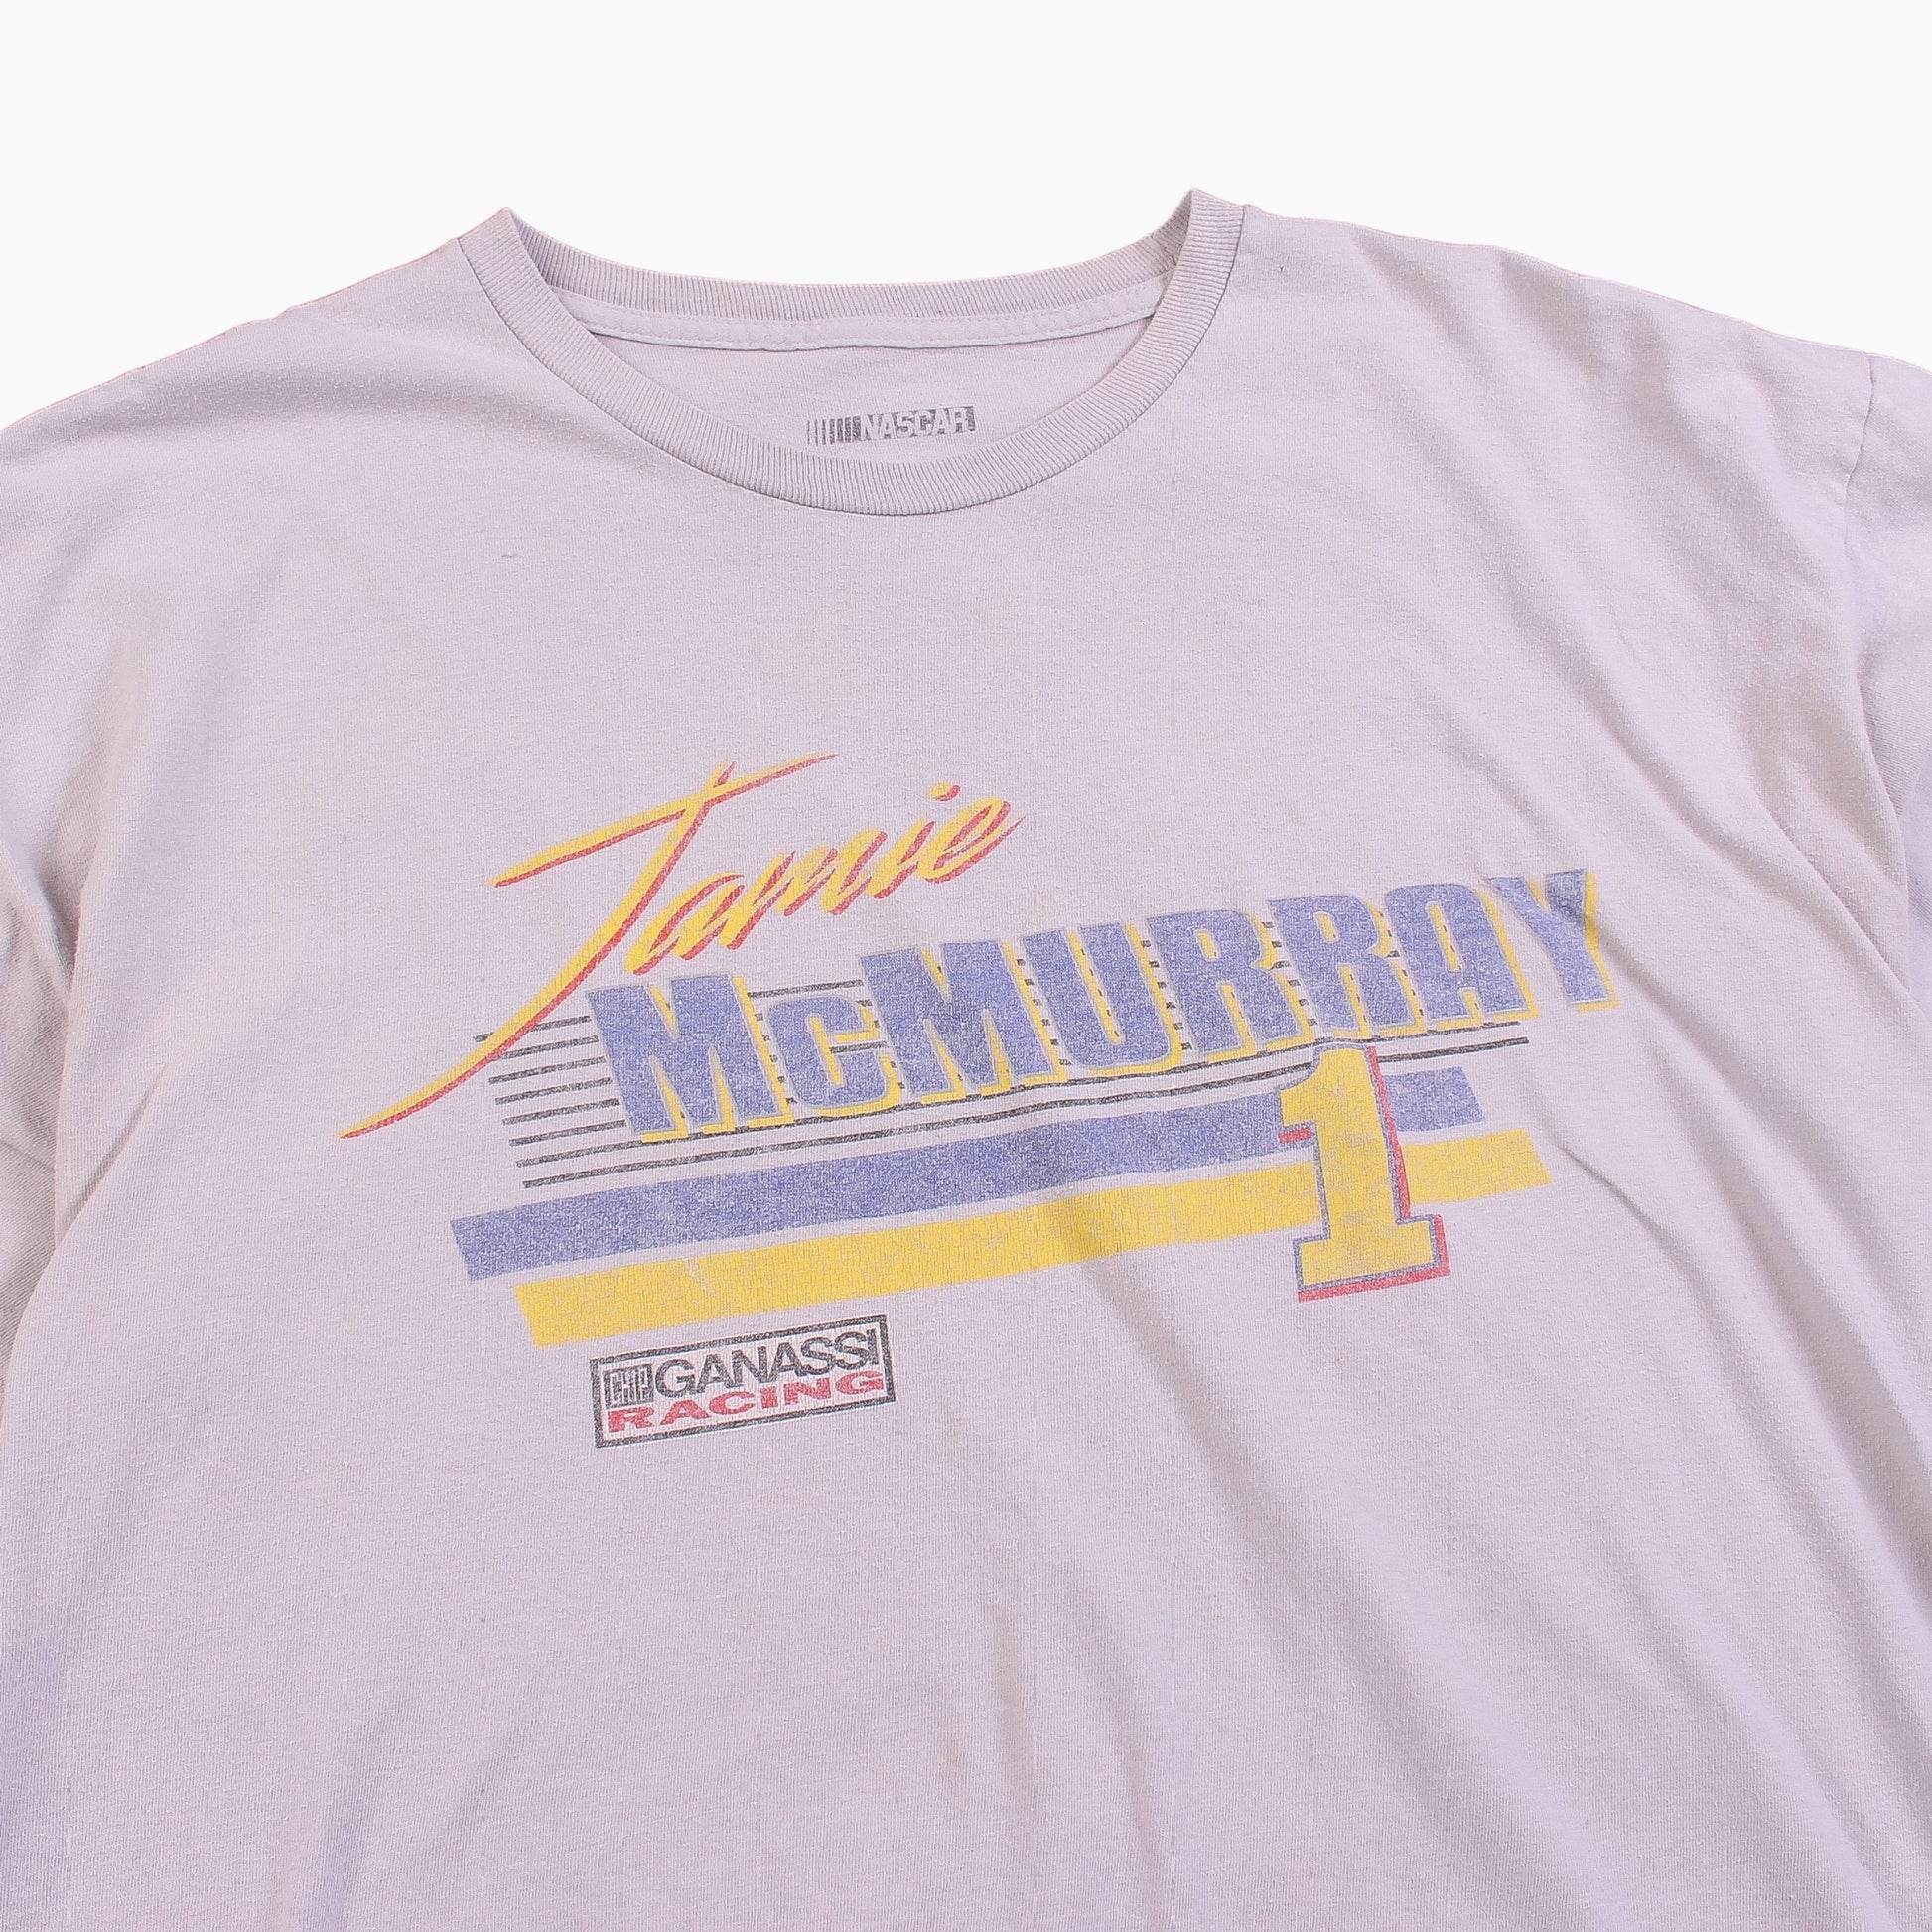 Vintage 'Jamie McMurray' T-Shirt - American Madness